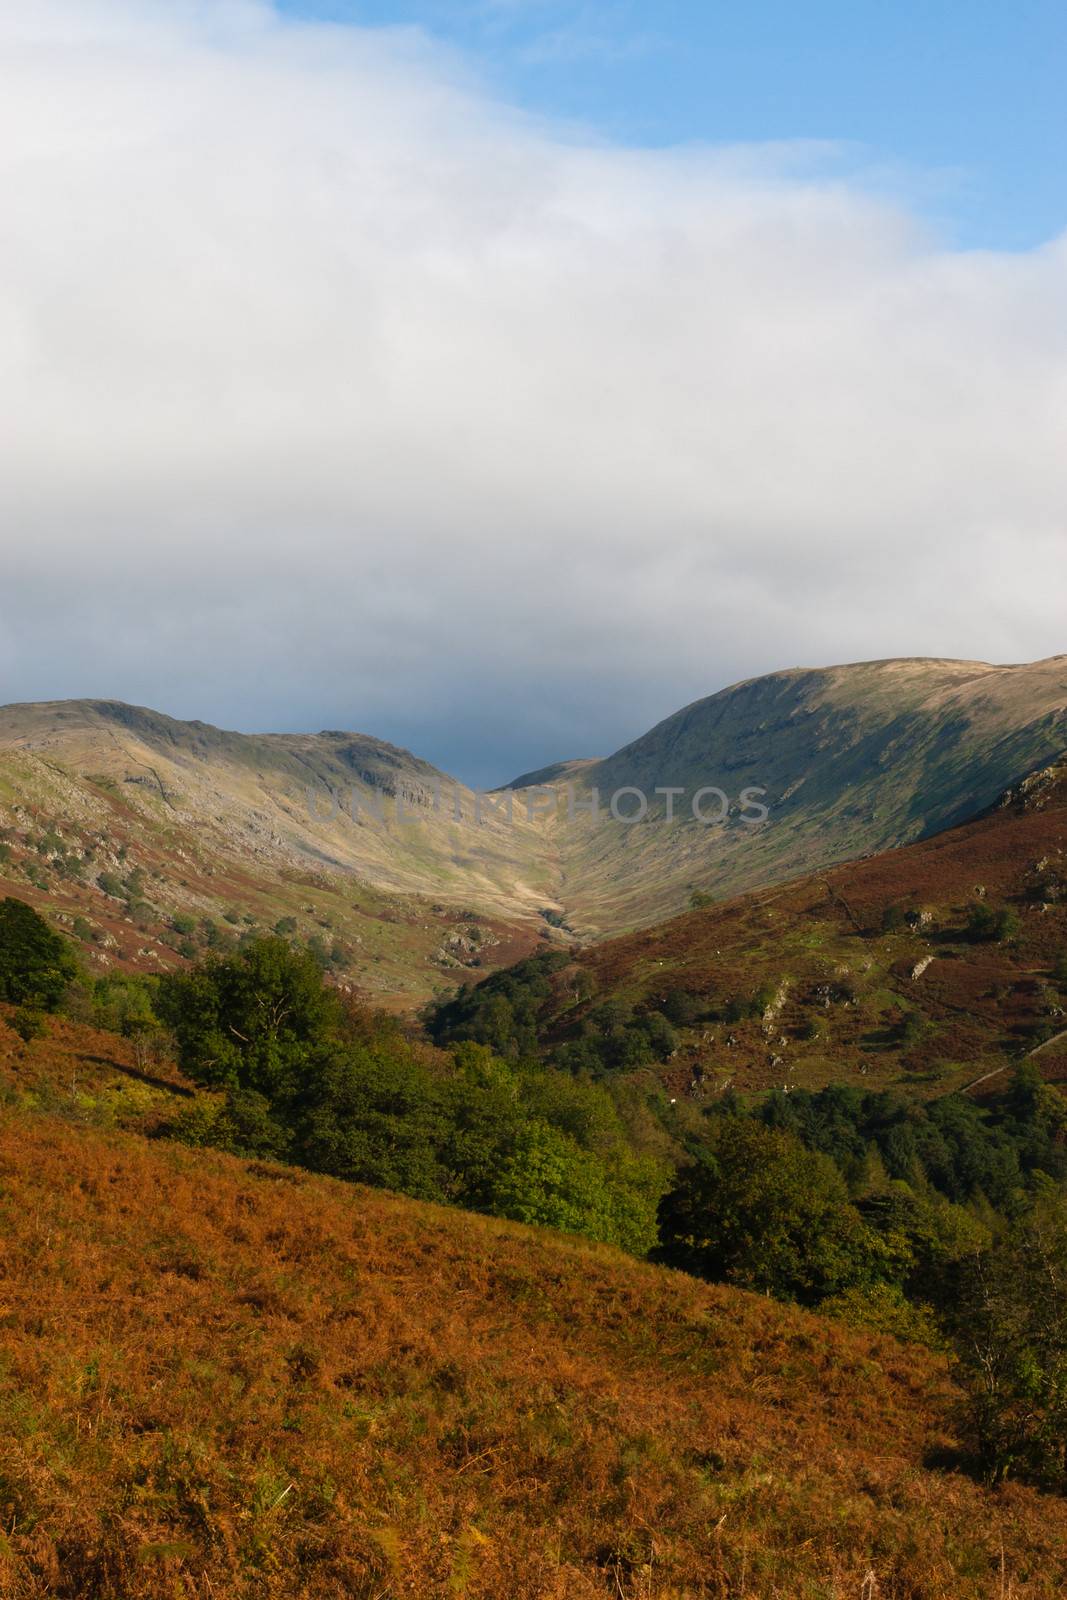 View over hills and valley in National Park, The Lake District, Cumbria. Taken on an Autumn day.